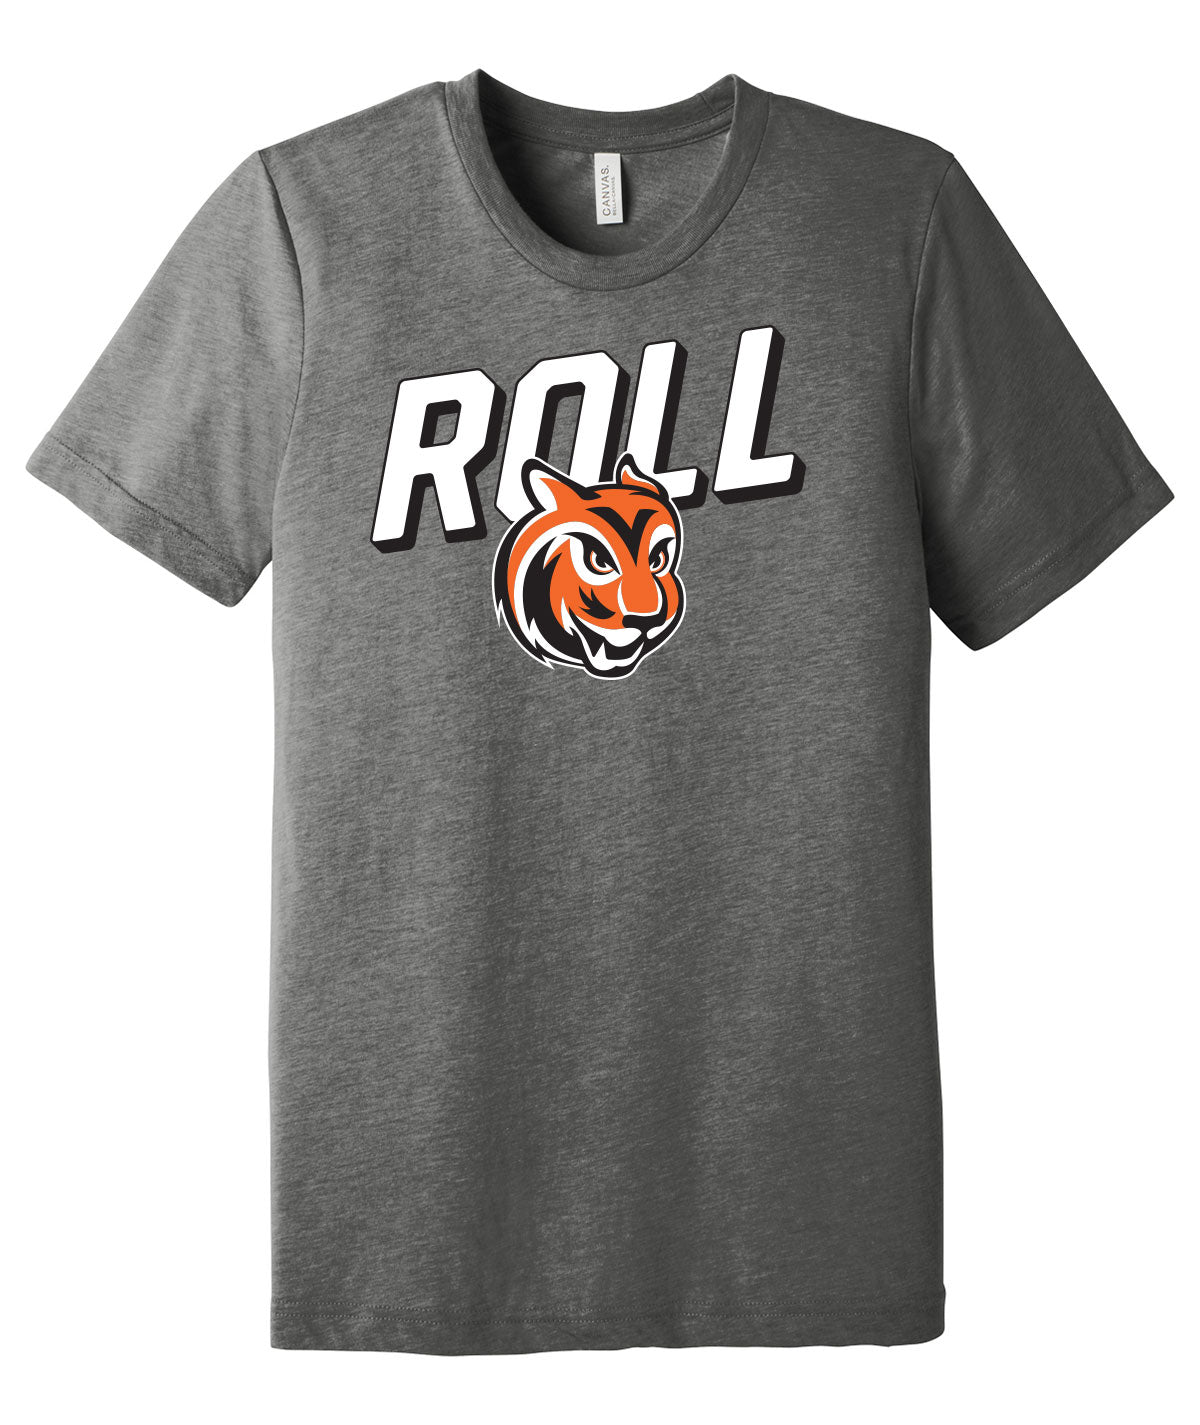 Roll Tigers Softstyle Tee